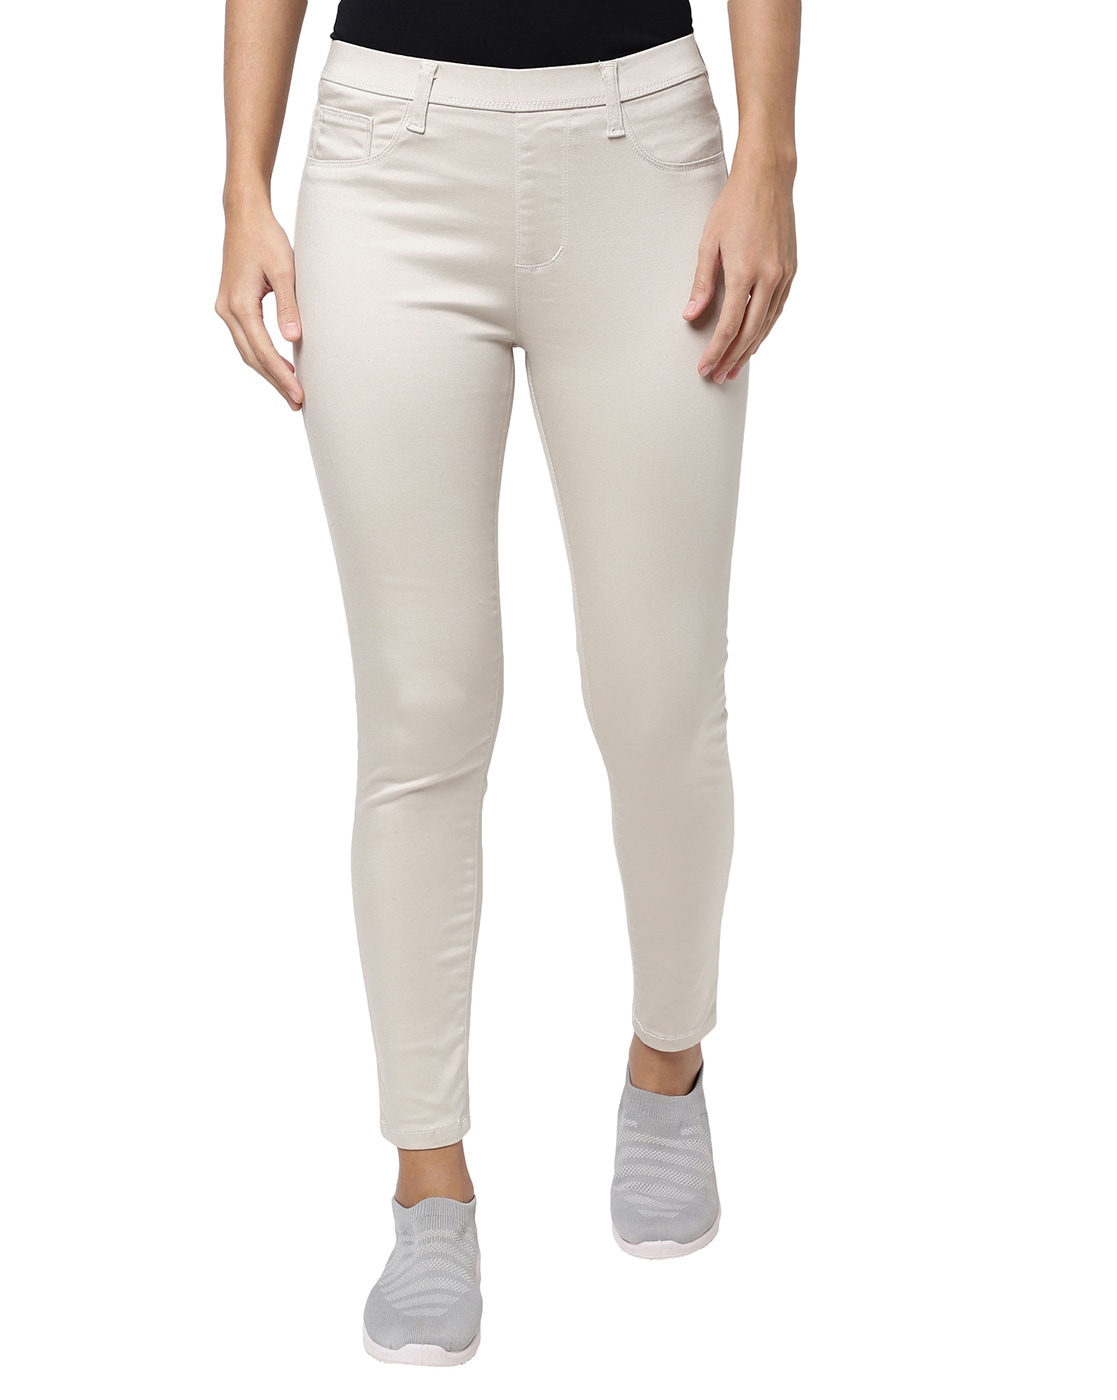 Buy OffWhite Trousers  Pants for Women by Fig Online  Ajiocom